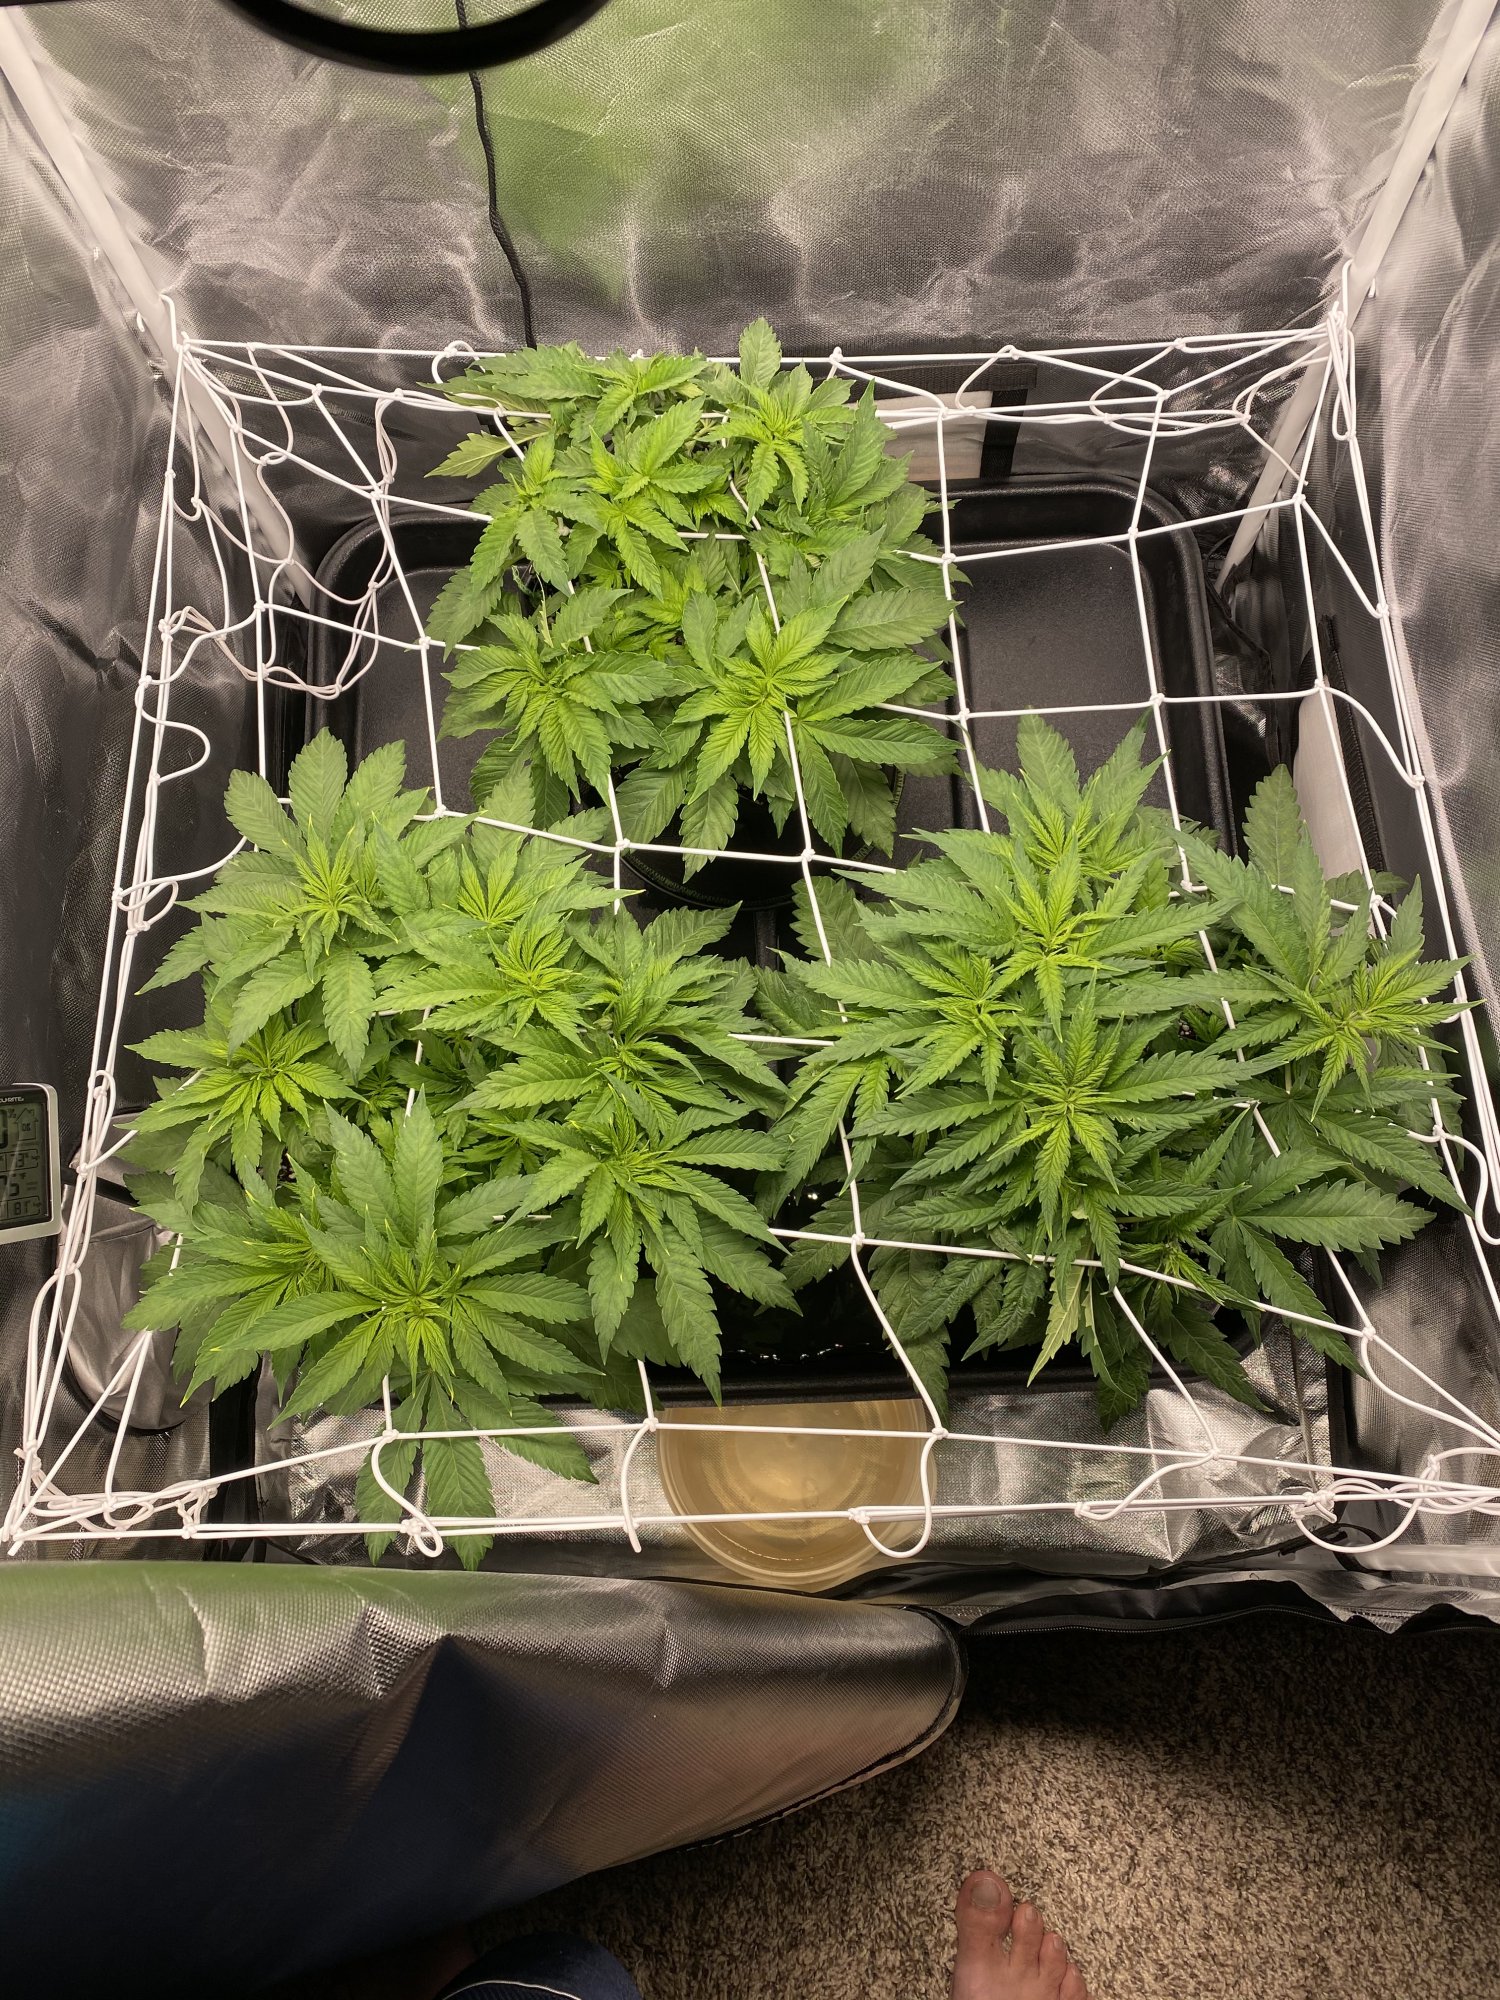 First grow issues